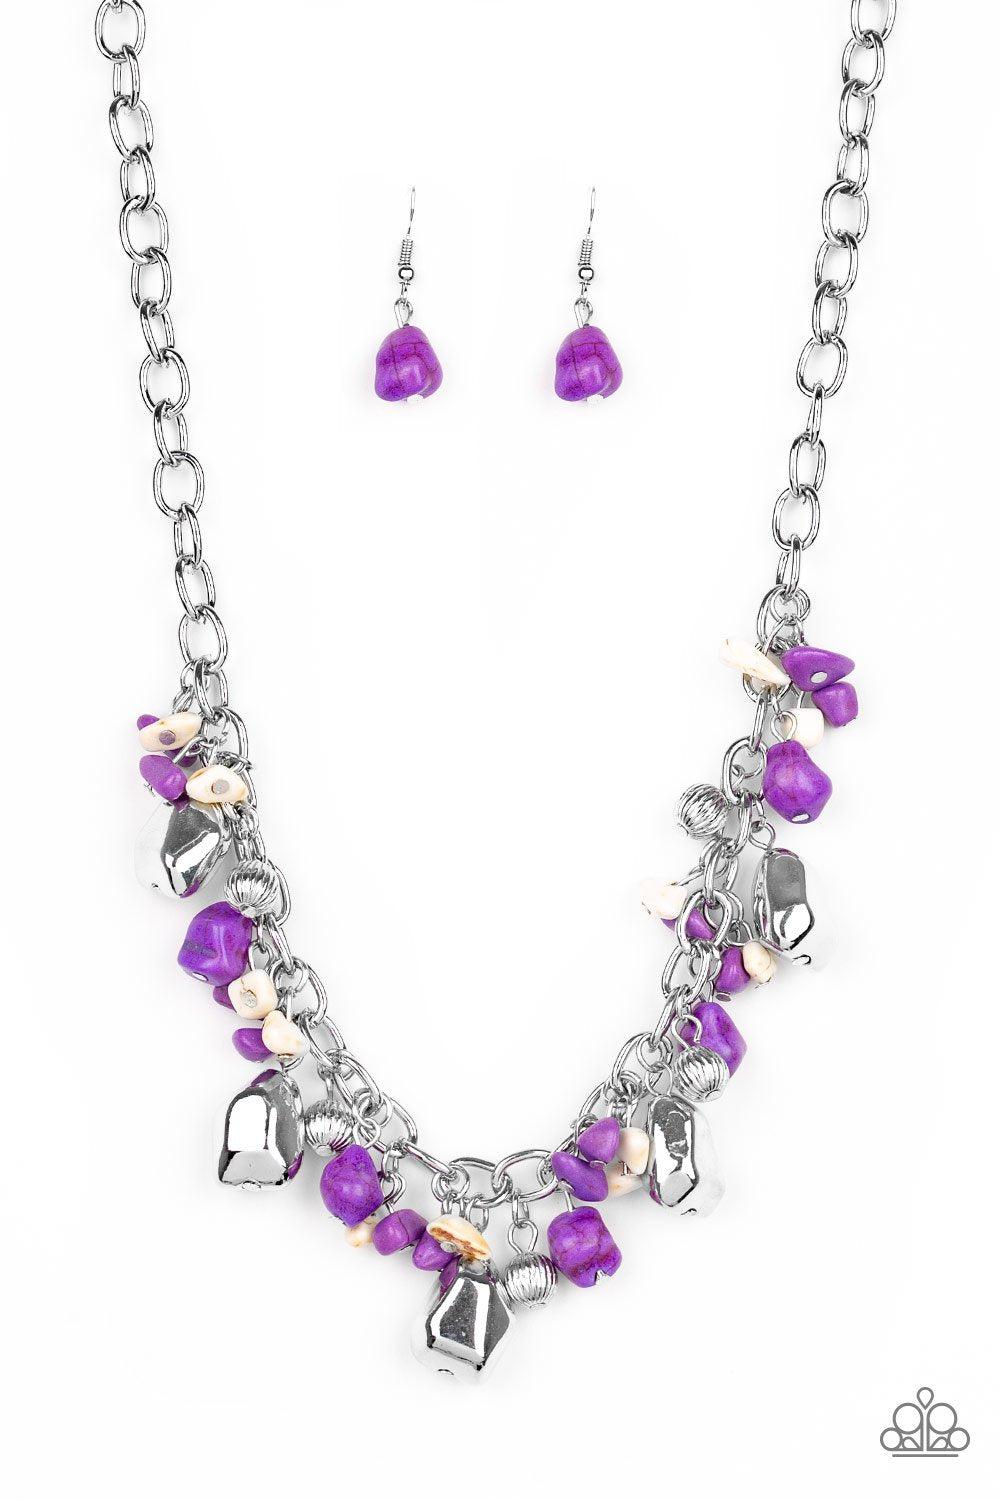 Quarry Trail Silver and Purple Stone Necklace - Paparazzi Accessories-CarasShop.com - $5 Jewelry by Cara Jewels